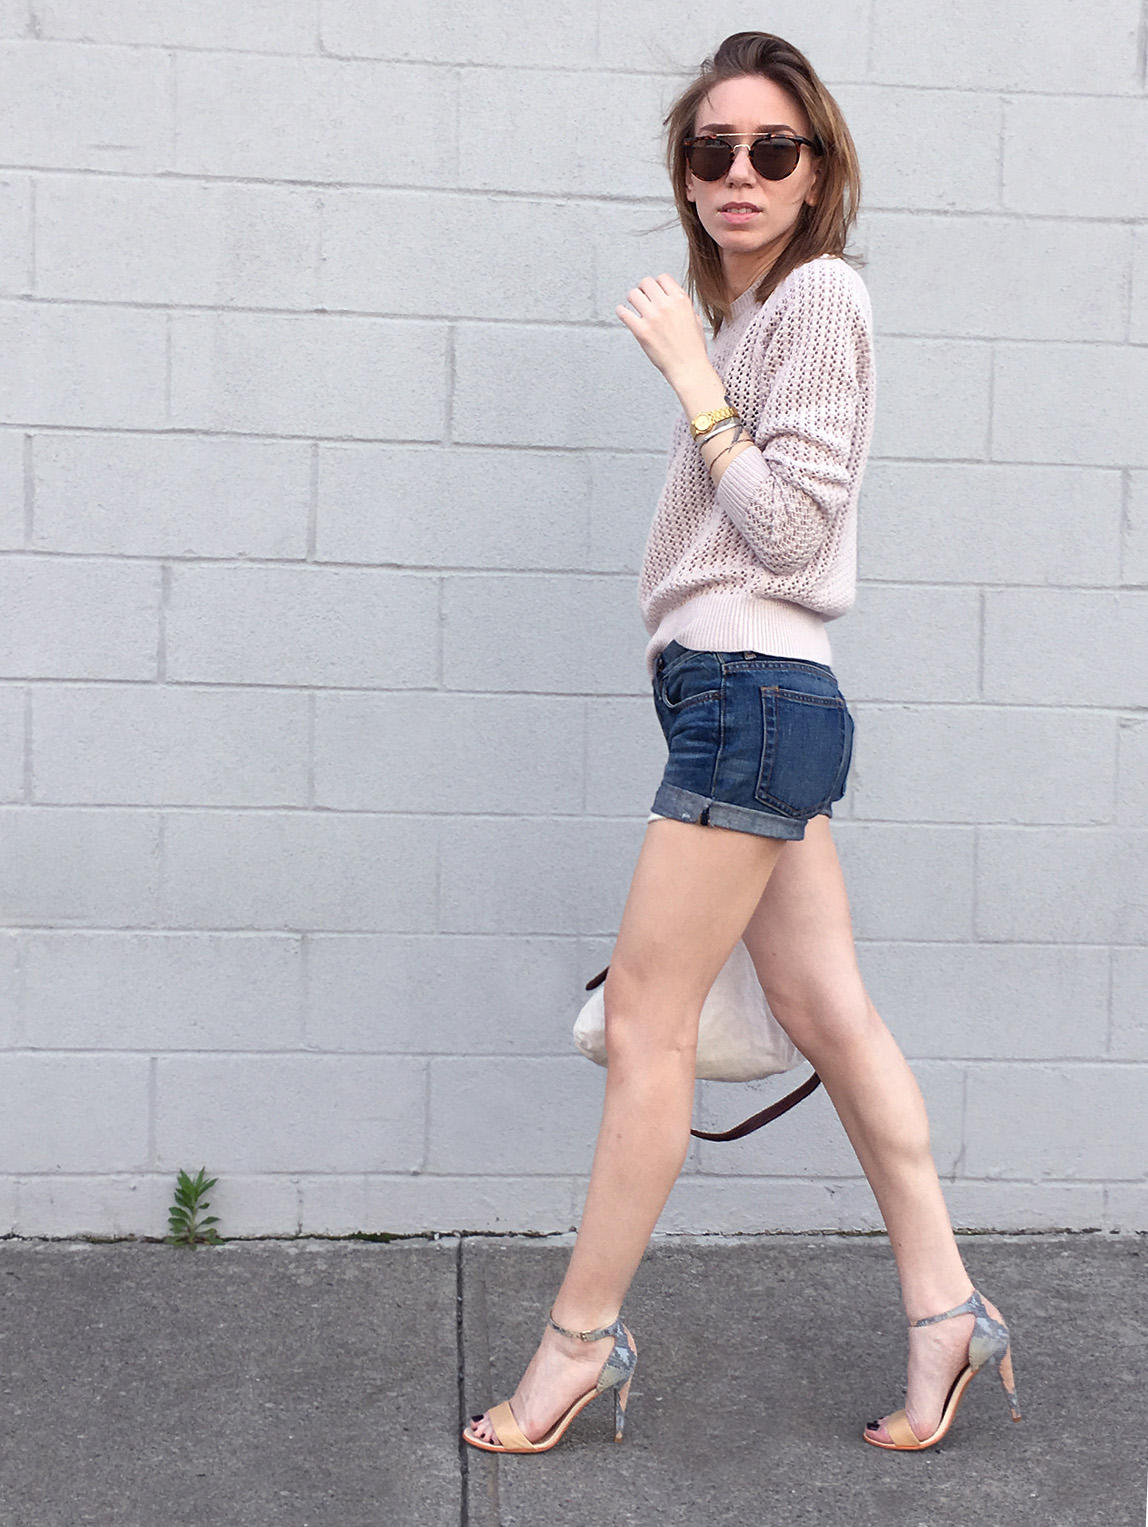 Sideview of pink sweater with denim shorts and heels